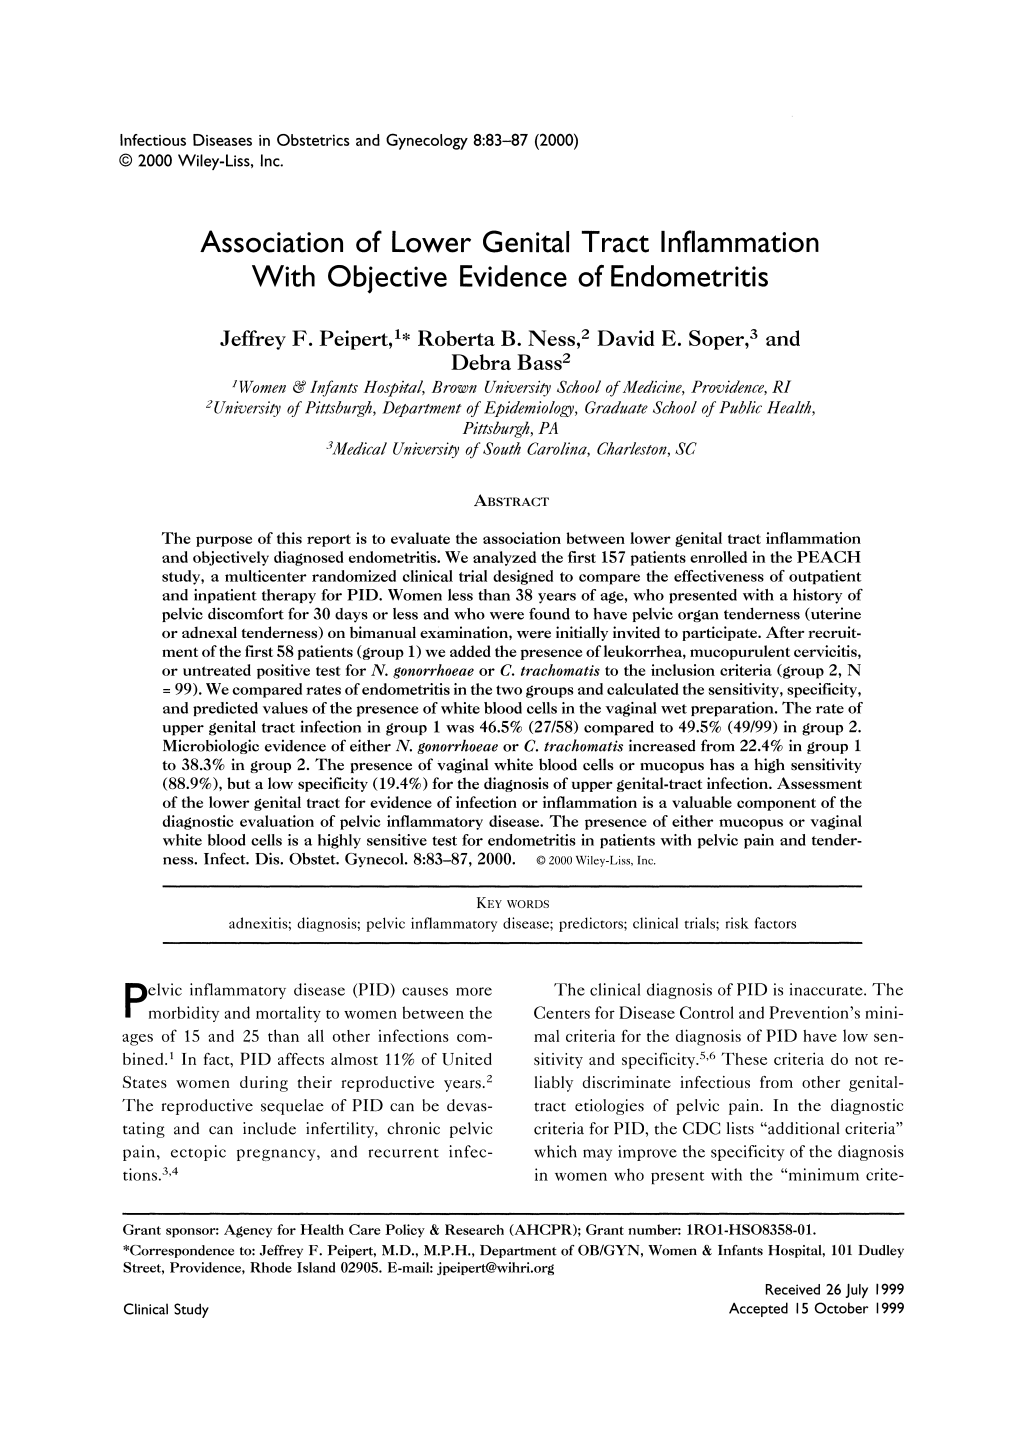 Association of Lower Genital Tract Inflammation with Objective Evidence of Endometritis